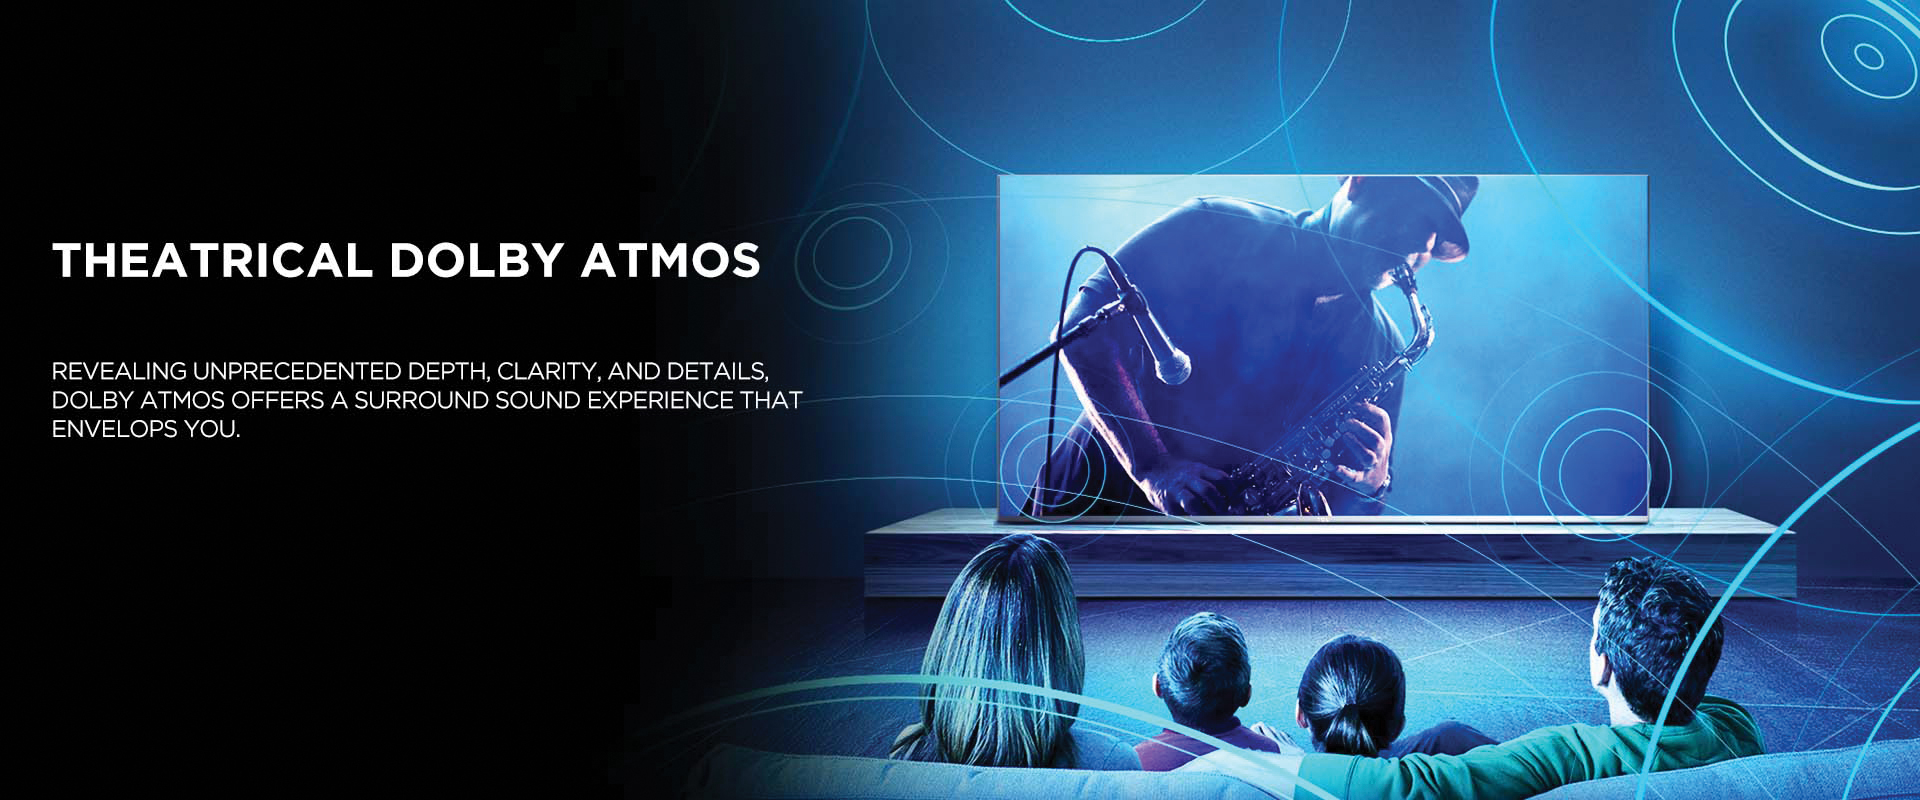 Theatrical Dolby Atmos - Revealing unprecedented depth, clarity, and details, Dolby Atmos offers a surround sound experience that envelops you.